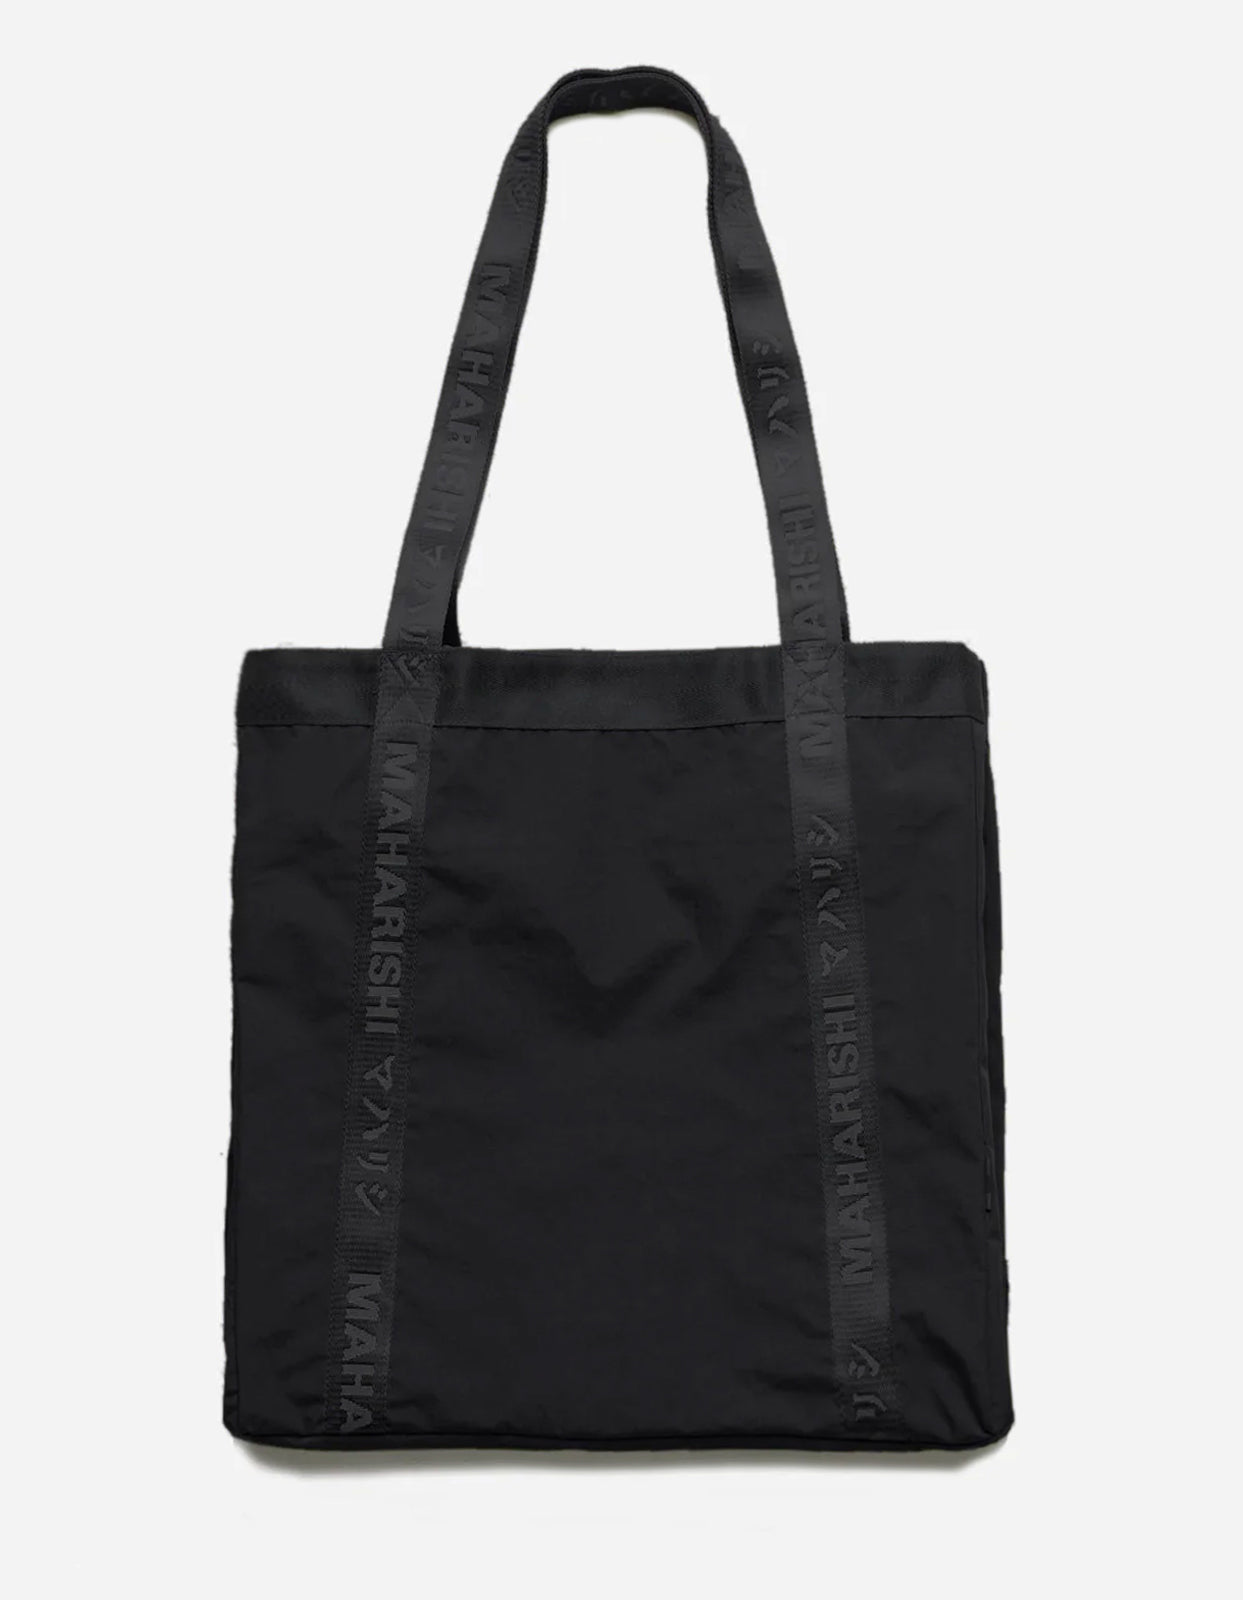 5046 WR Stand Utility Tote Bag Black